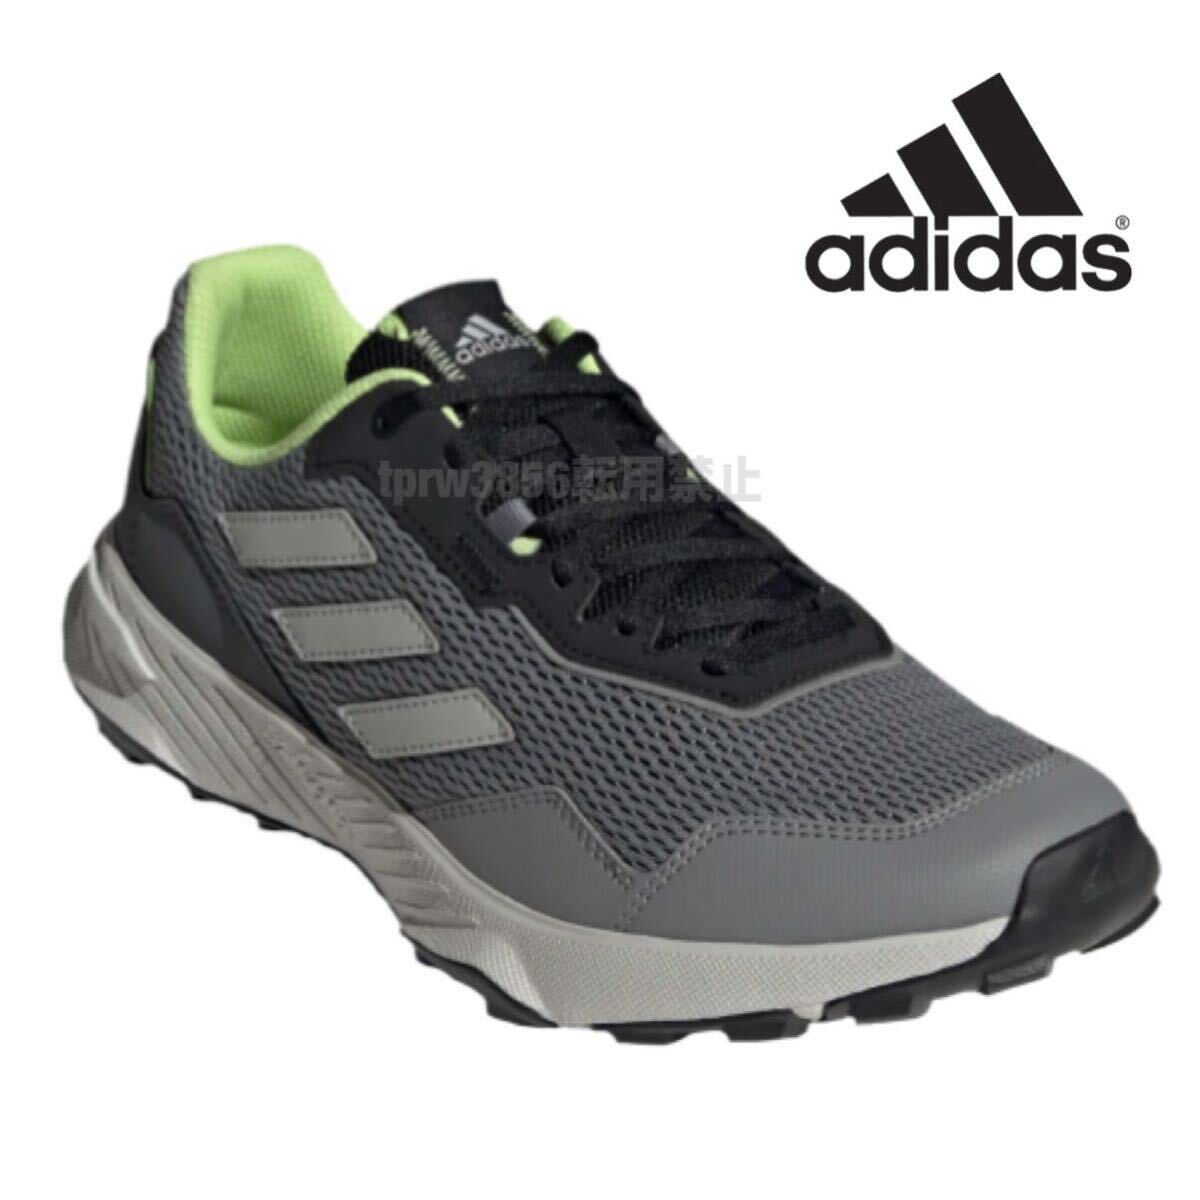  new goods unused Adidas [26.5cm] Trail shoes trekking adidas mountain climbing Tracefinder shoes running camp outdoor 47234